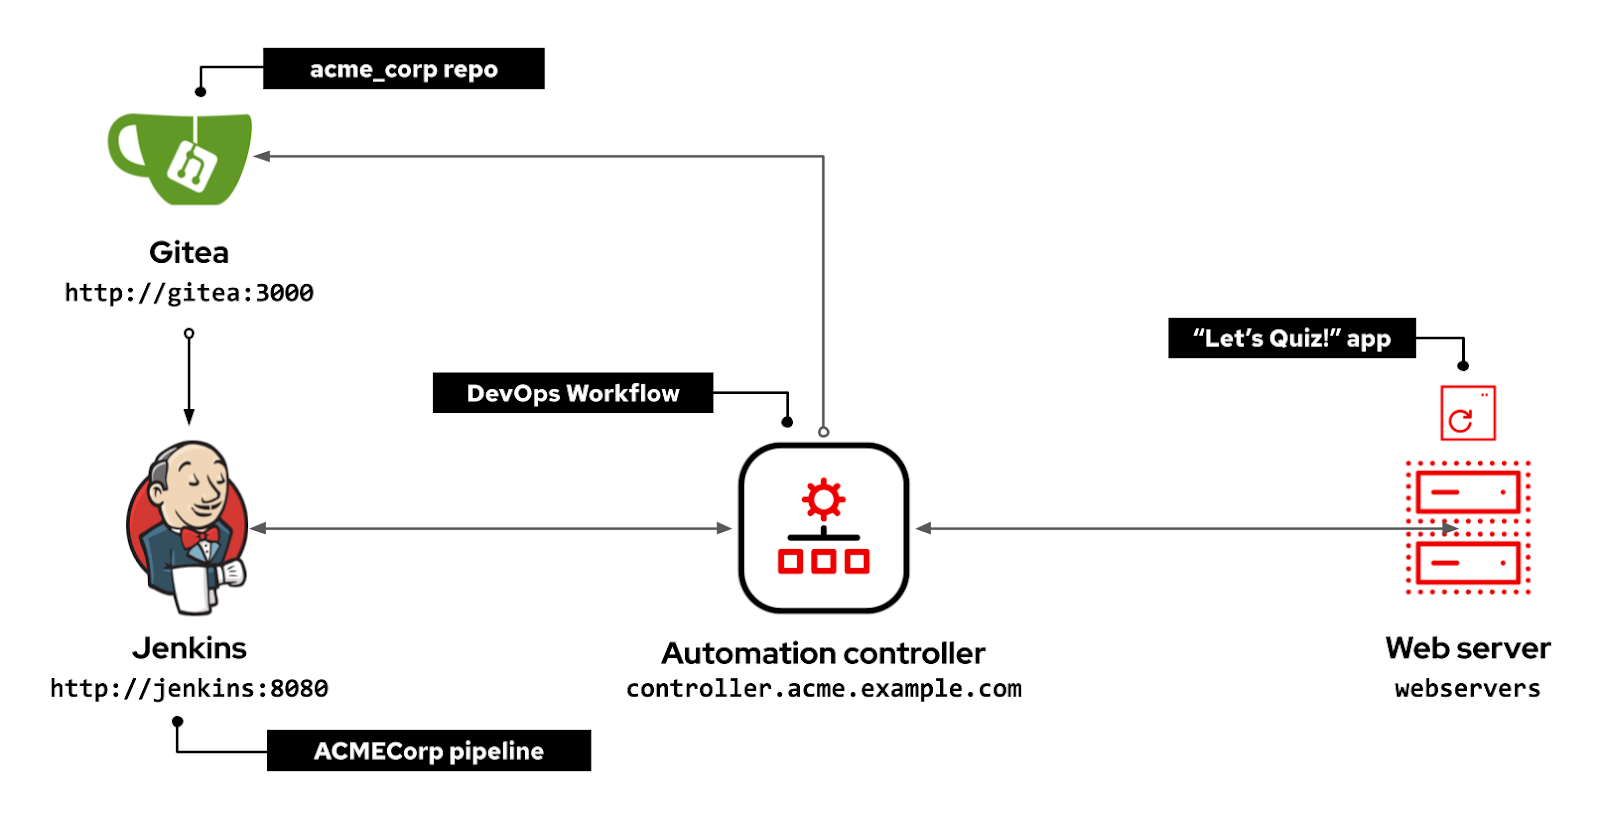 DevOps and CI/CD with automation controller